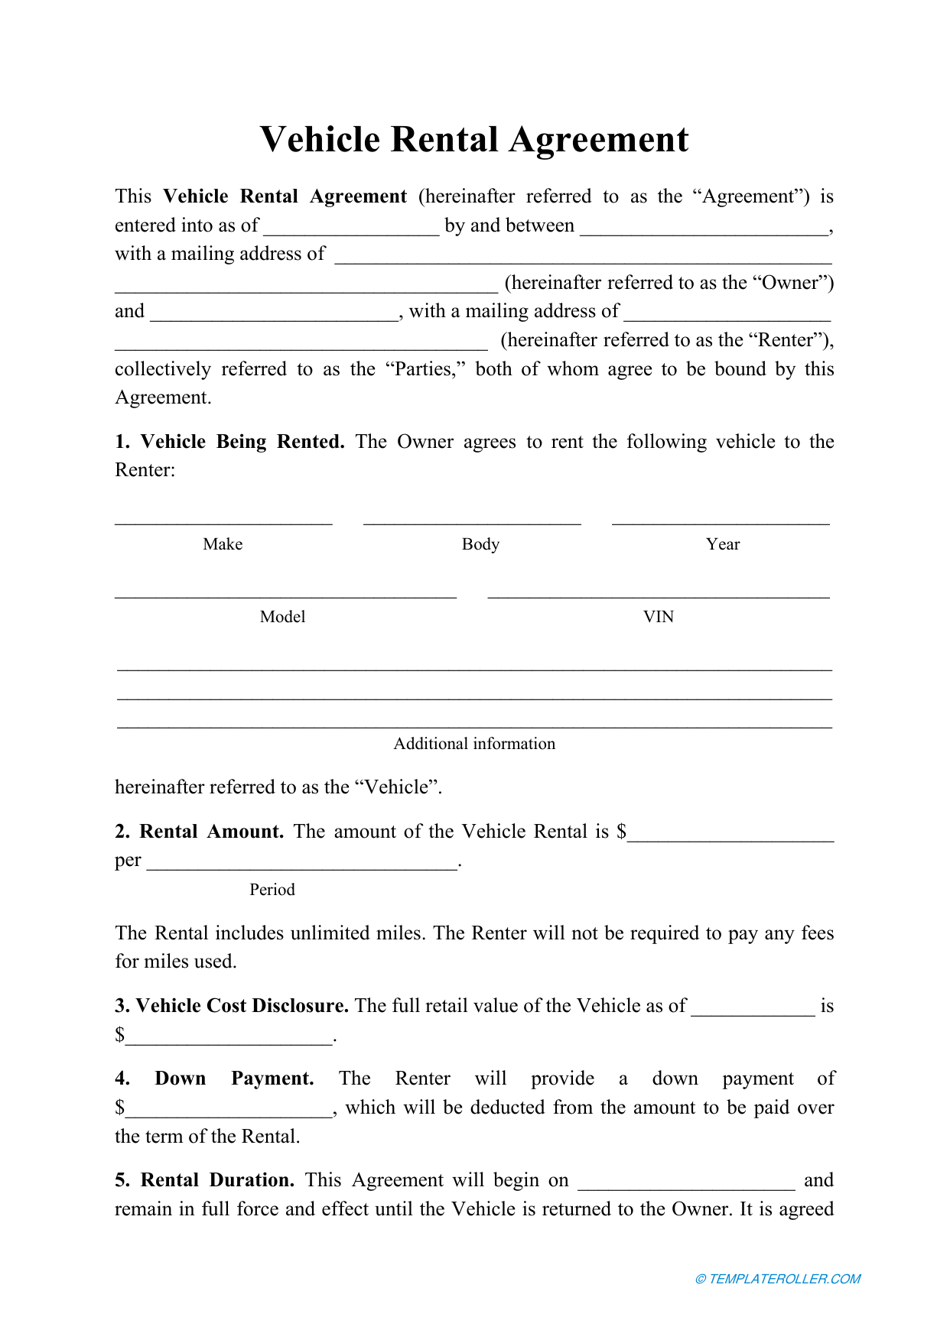 Vehicle Rental Agreement Template Download Printable PDF Intended For vehicle rental agreement template